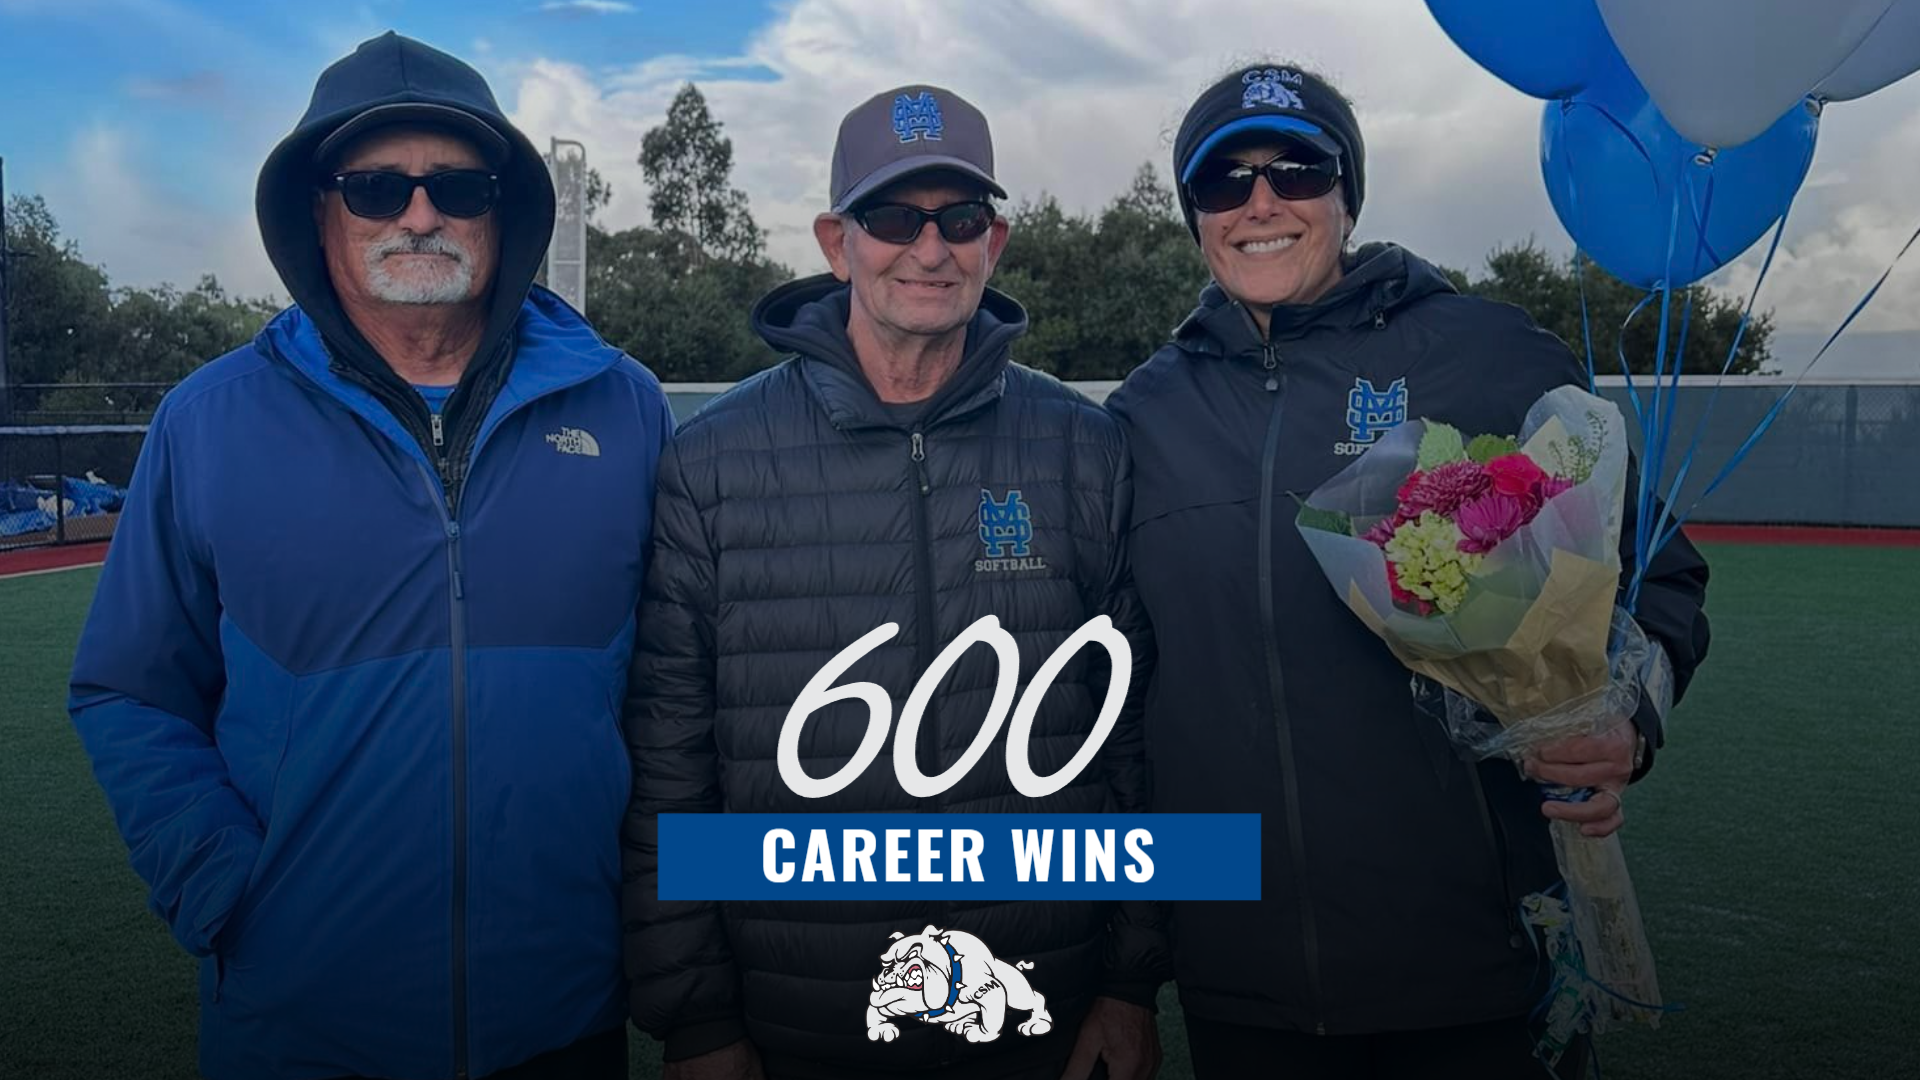 CSM head coach Nicole Quigley-Borg (right) following her 600th career win with assistant coaches Toby Garza and Dale Bassmann.